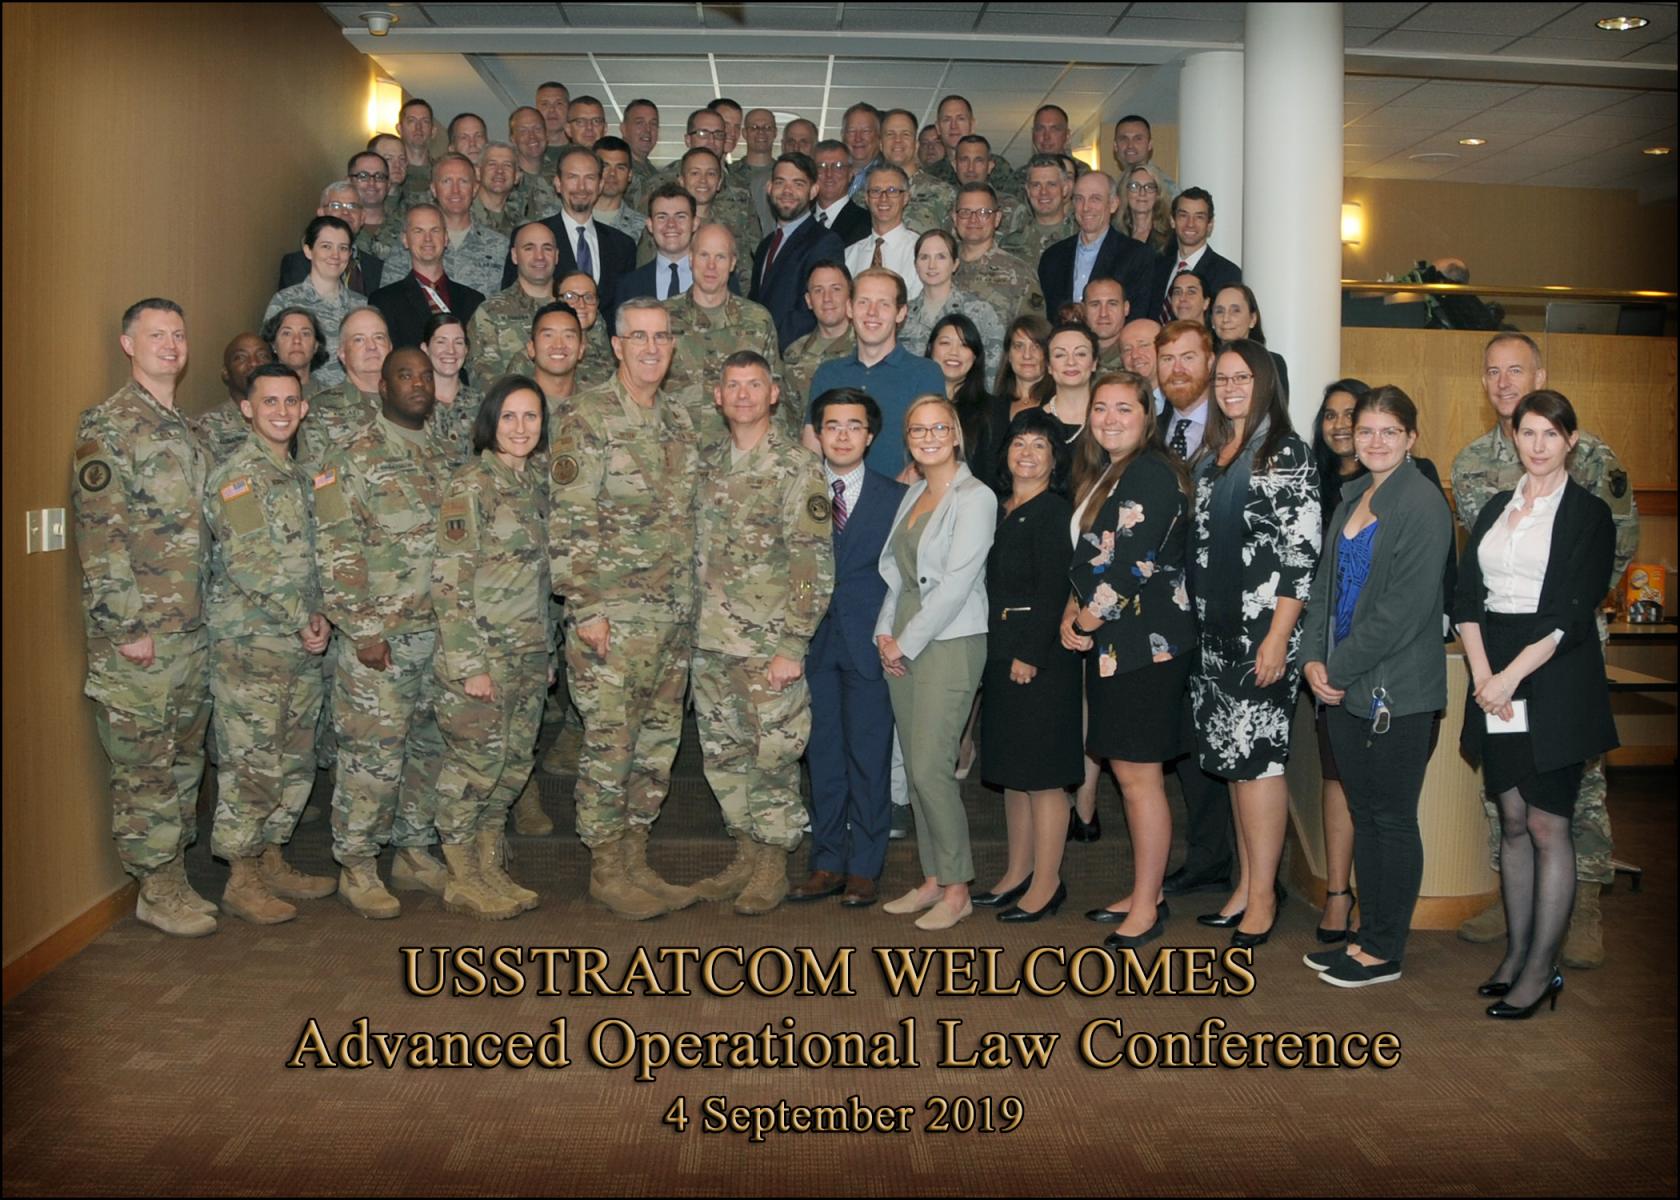 Advanced Operational Law Conference group photo